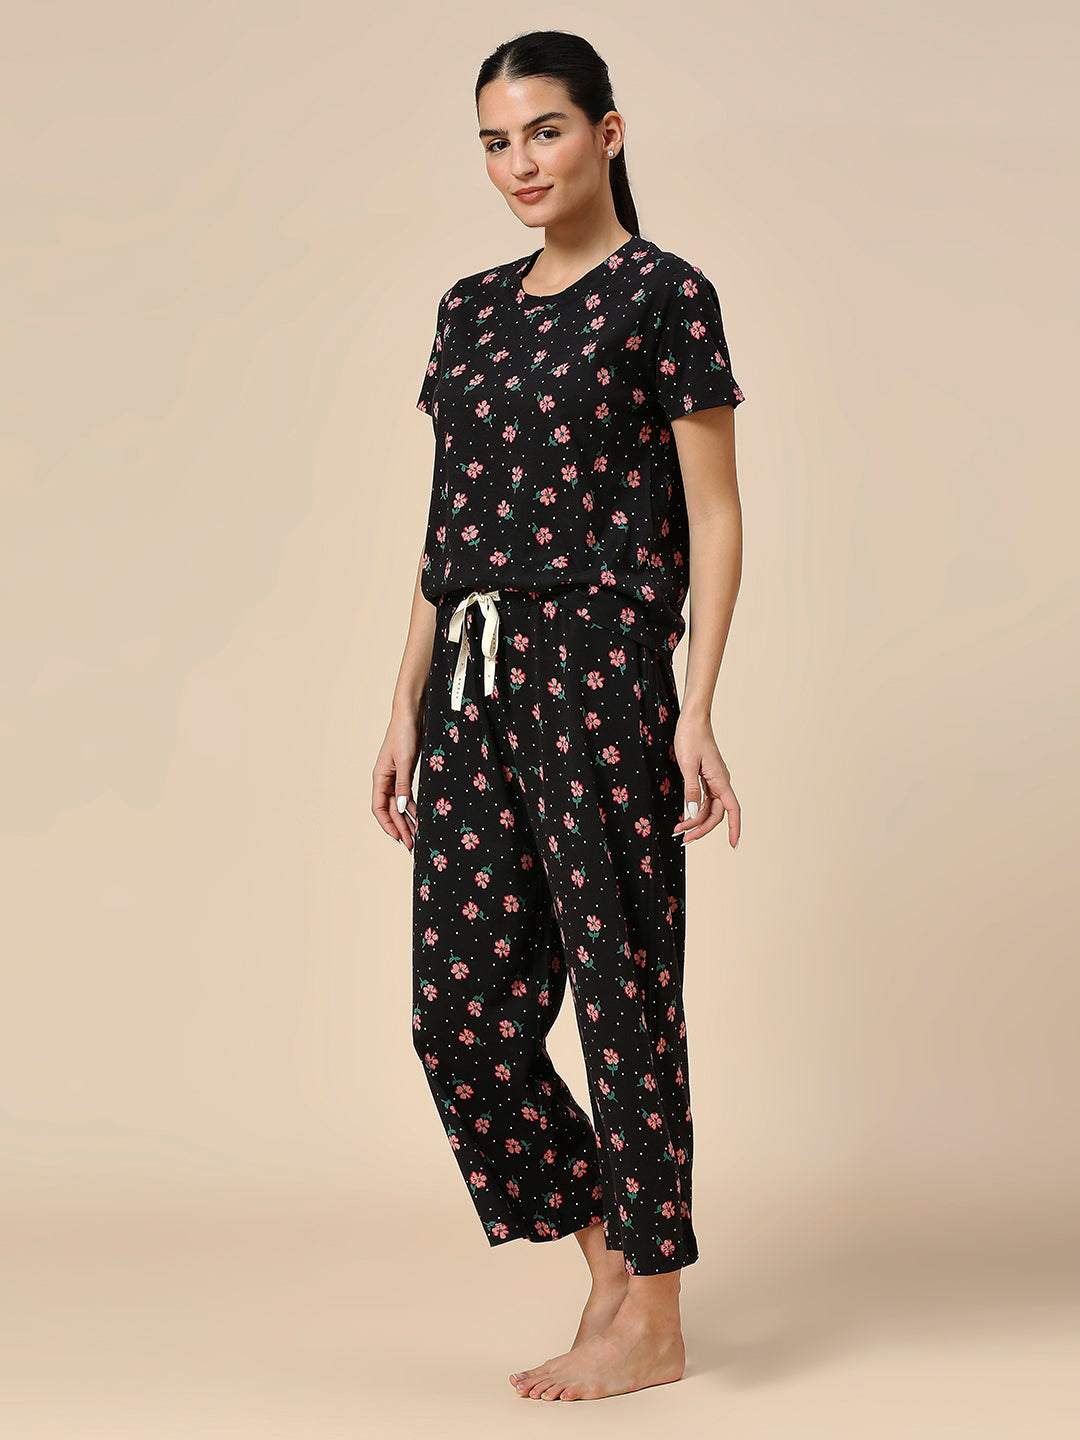 FLORAL PRINTED COTTON JERSEY ESSENTIAL LOUNGE SET